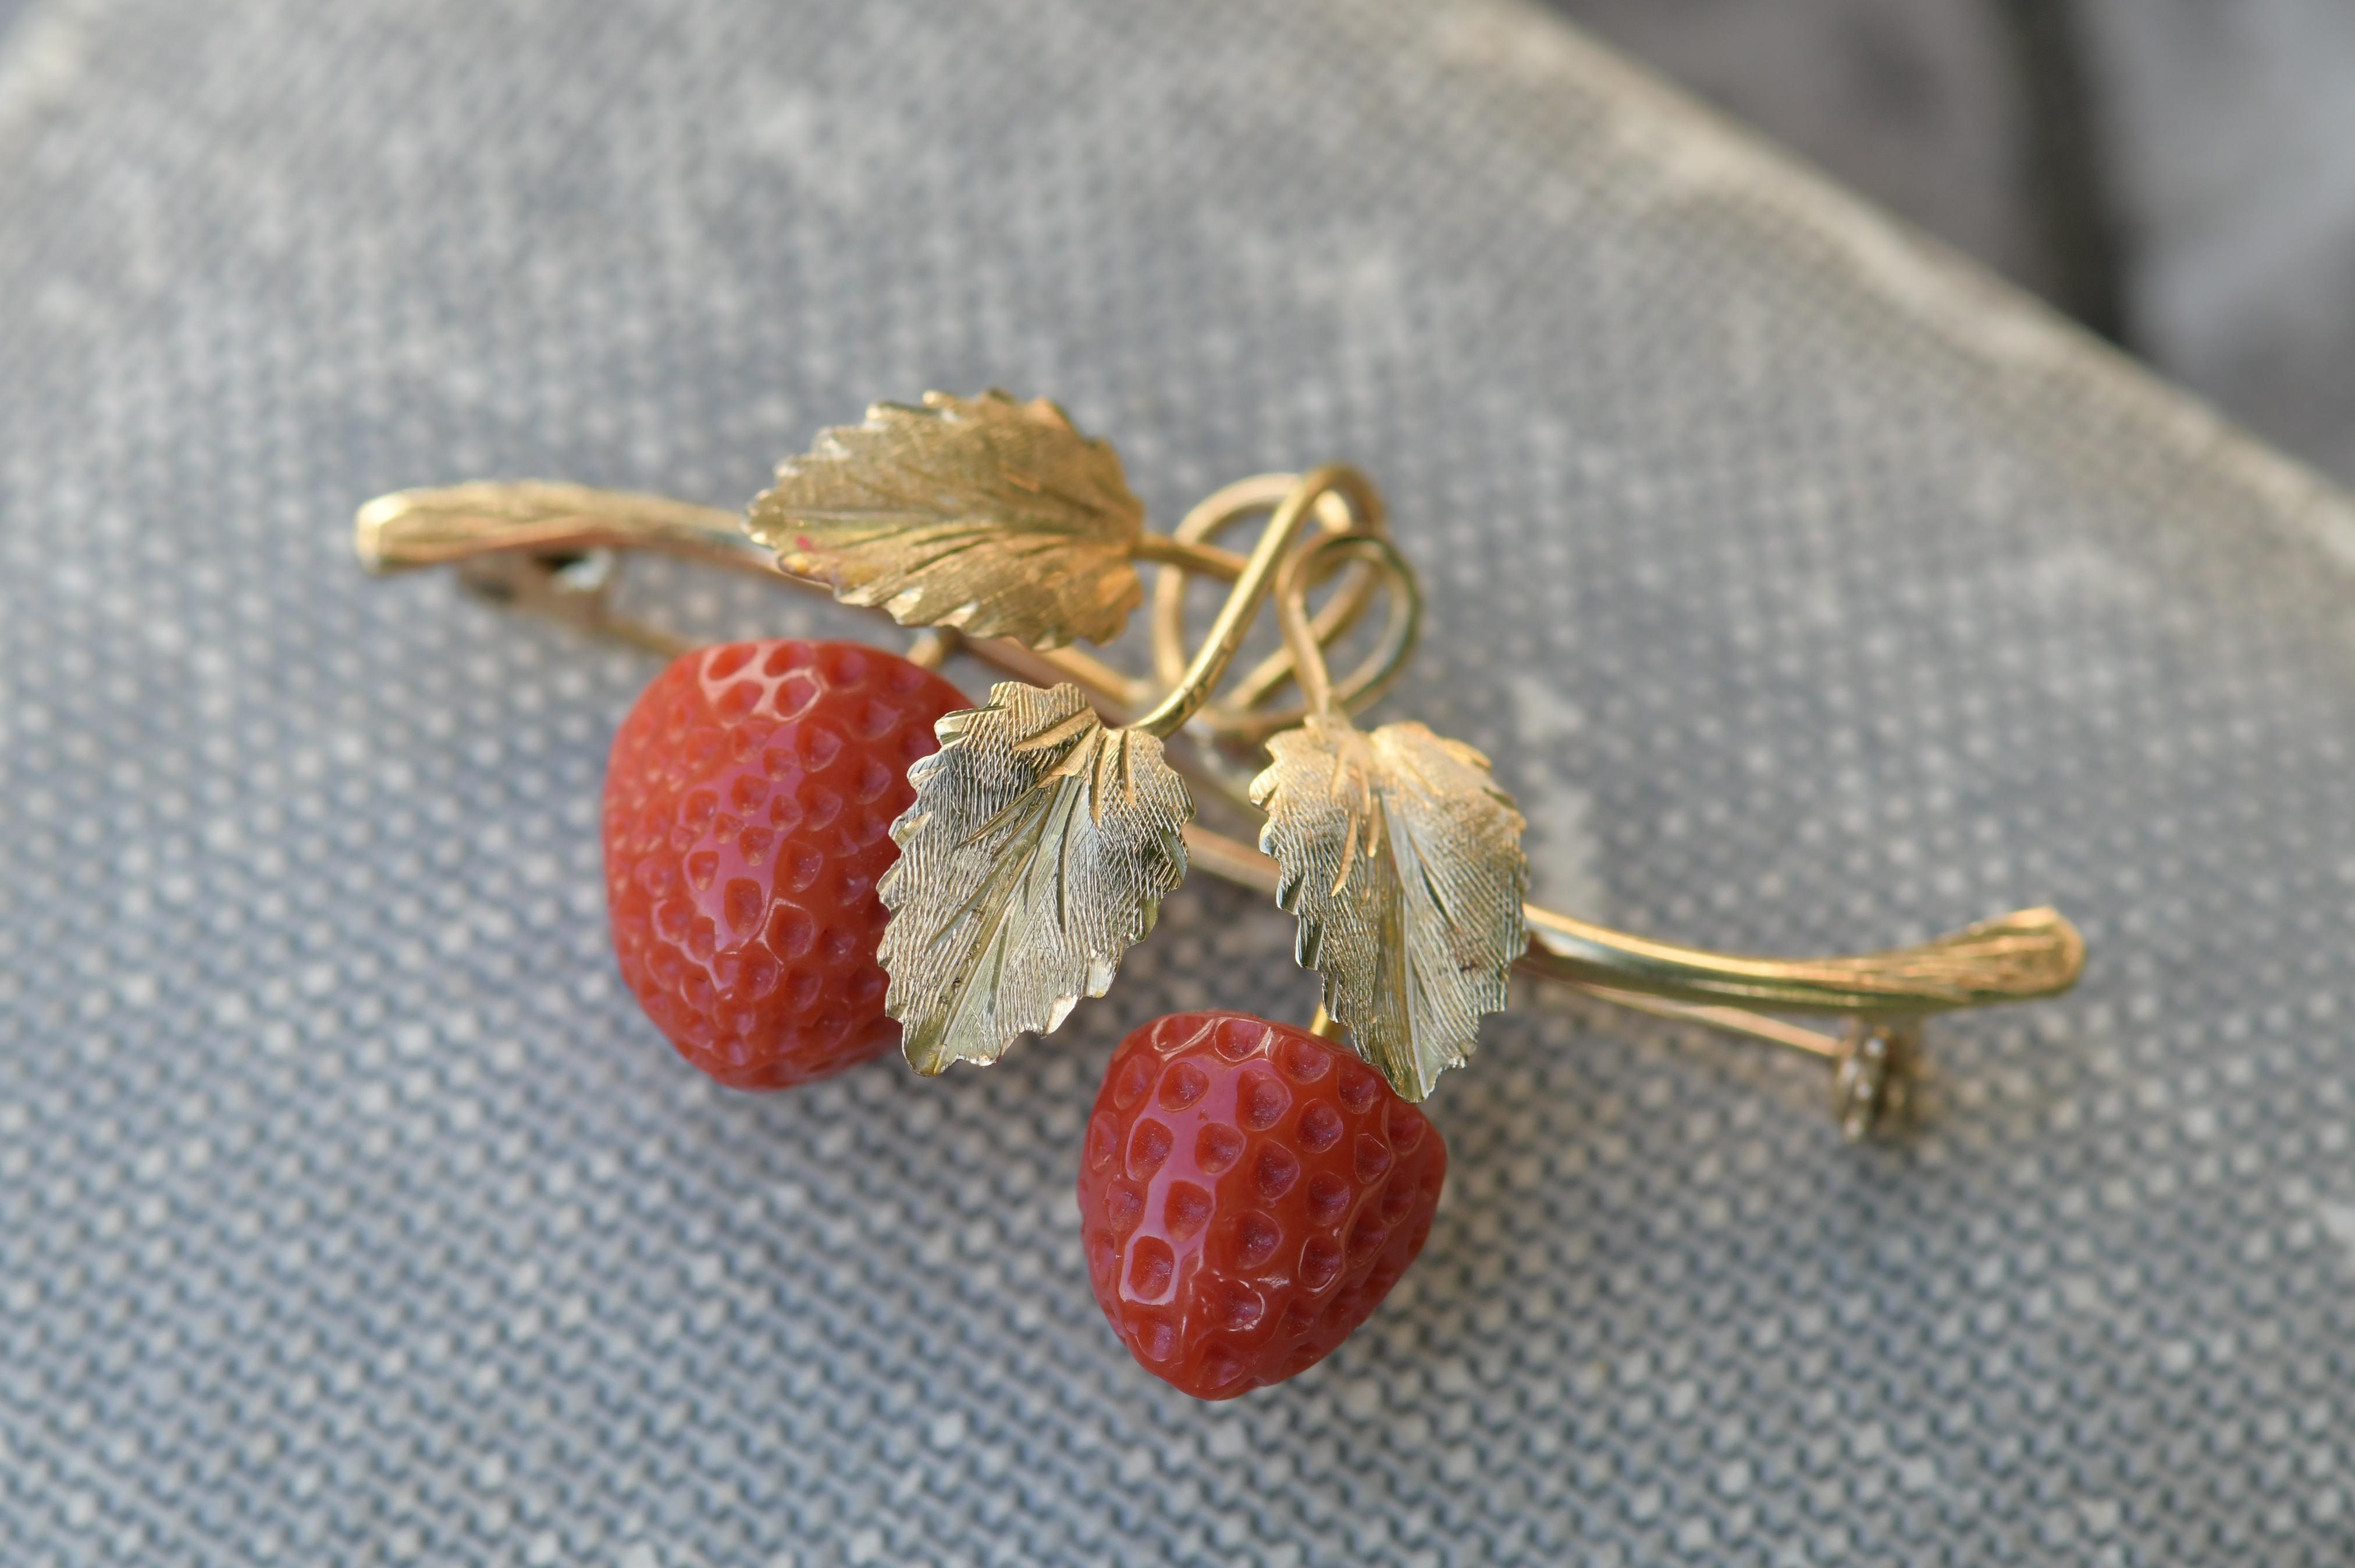 This very fine and sweet antique strawberry brooch has been crafted in 18 ct yellow gold, It was carefully handmade - one of a kind.

The plant is ornamented with carved red fine quality coral strawberries. hallmarked 750 on the back.

Excellent